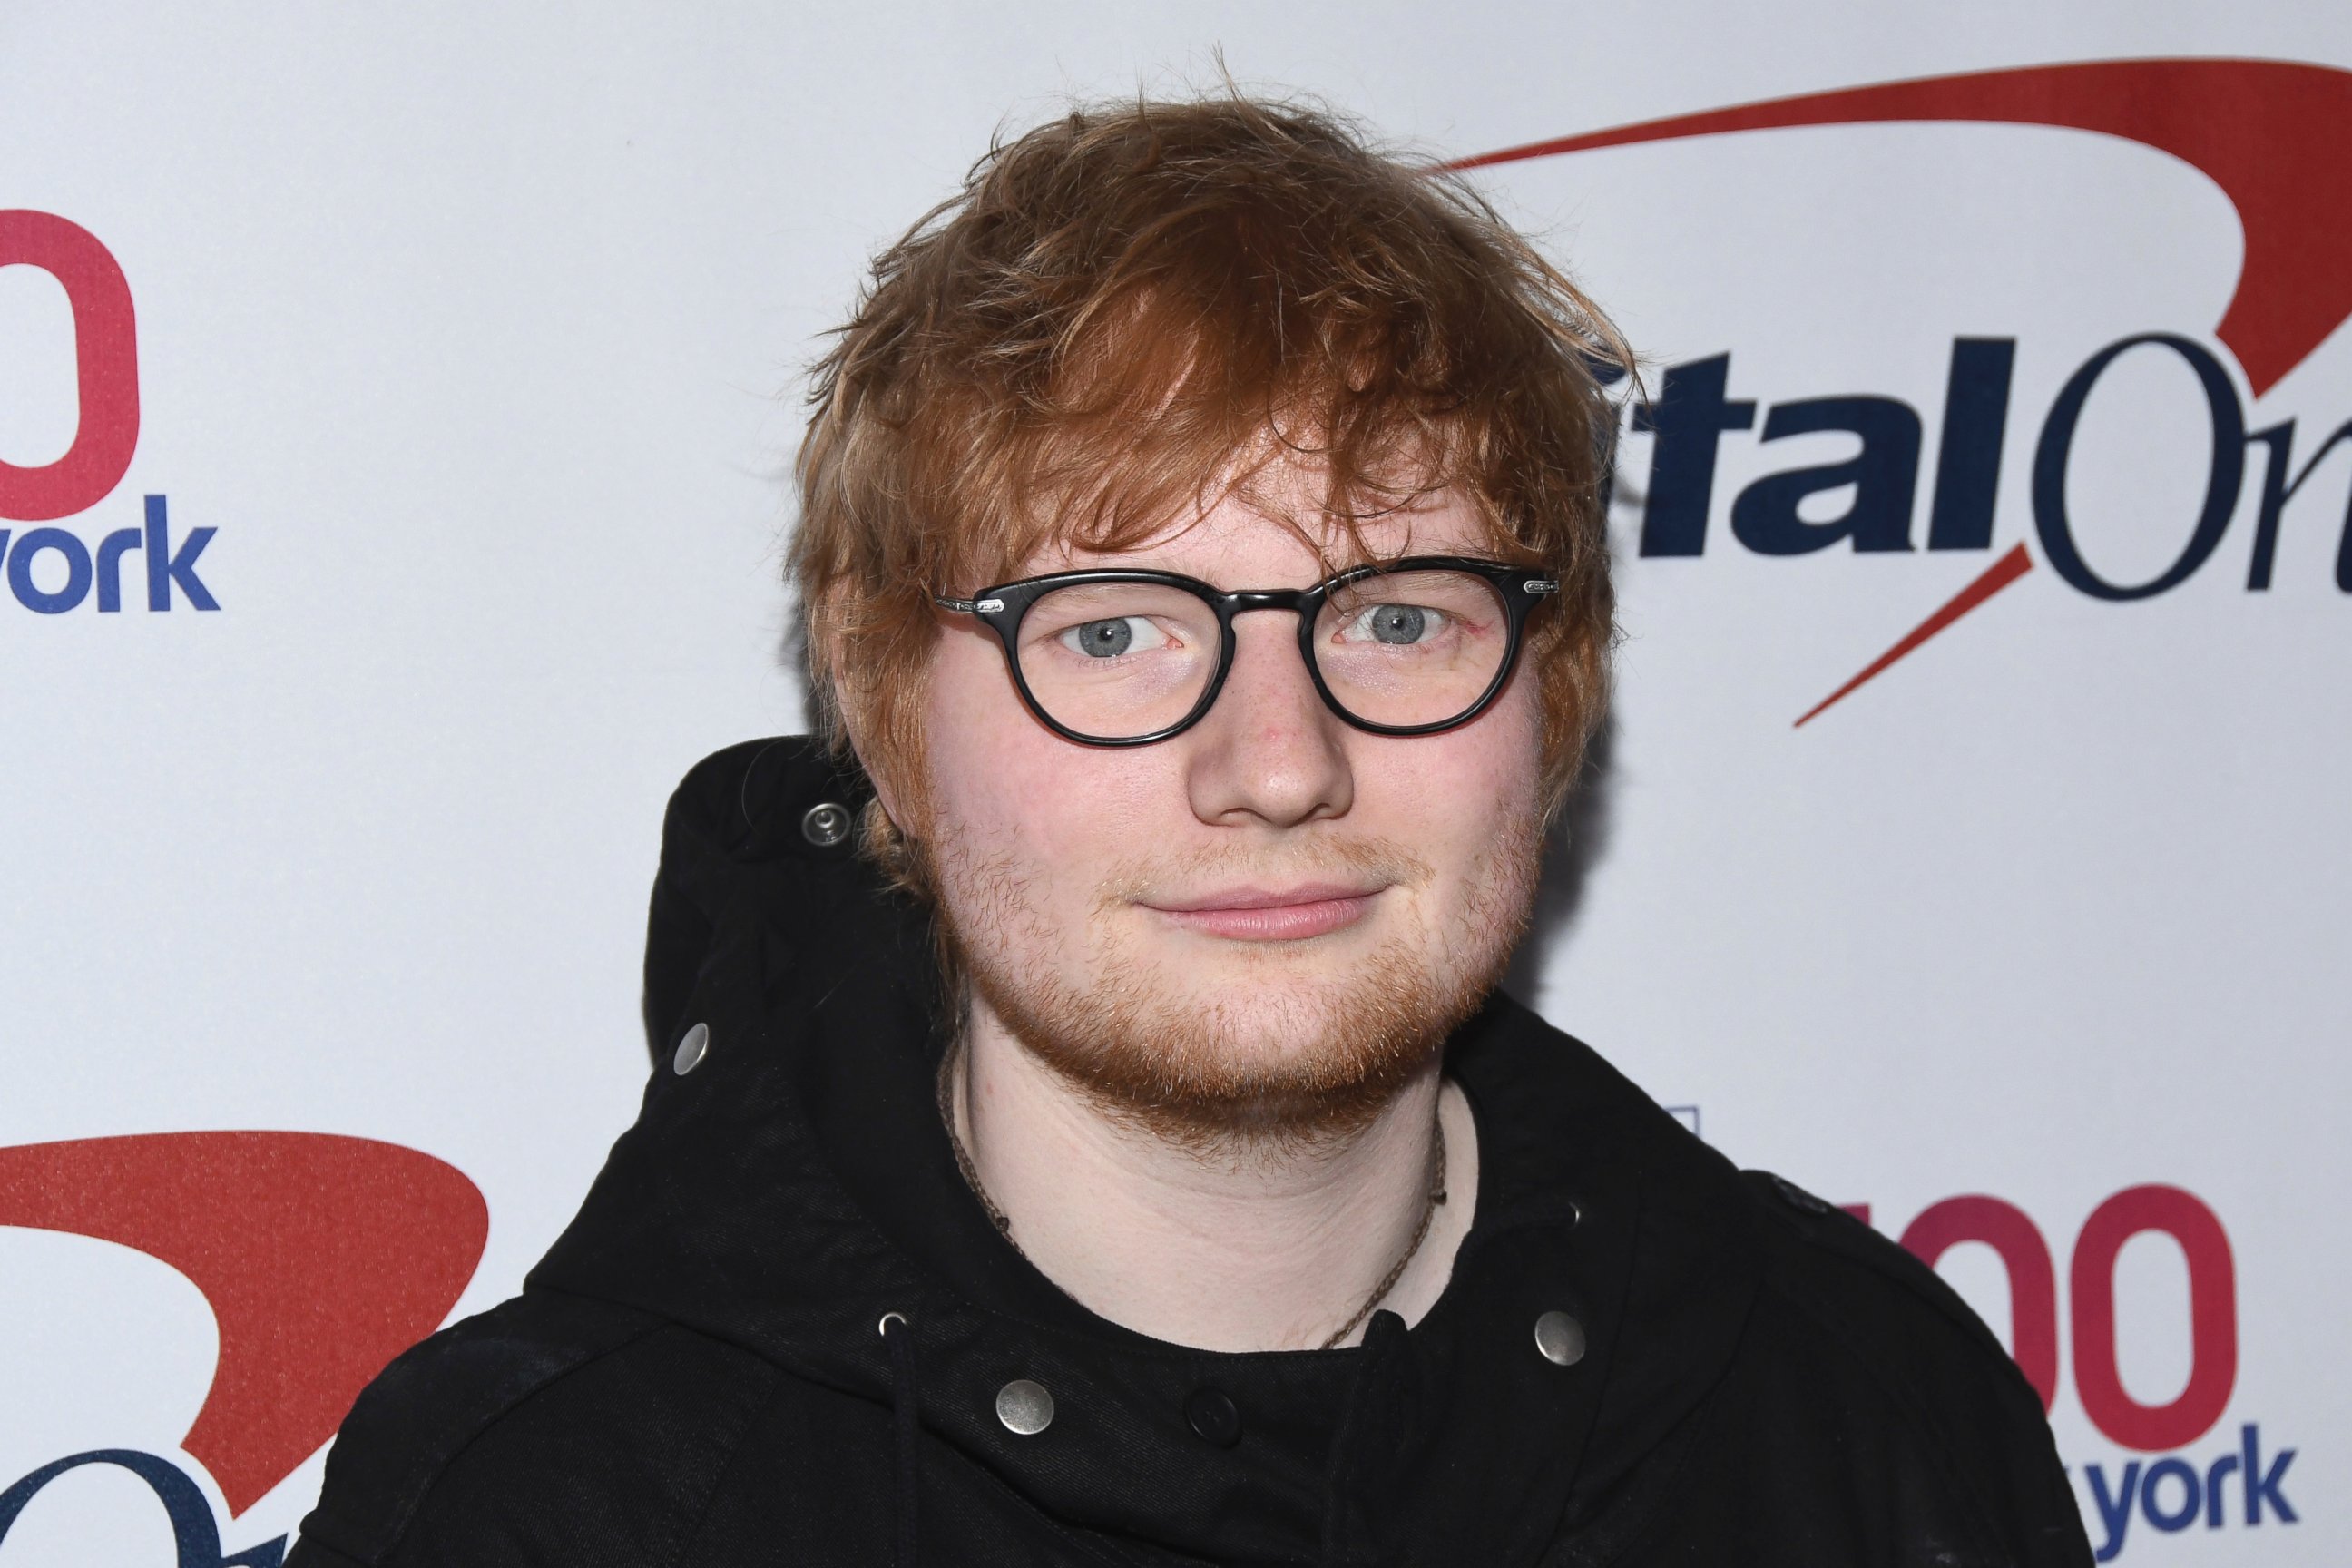 PHOTO: Ed Sheeran attends Z100's iHeartRadio Jingle Ball at Madison Square Garden on Friday, Dec. 8, 2017, in New York.